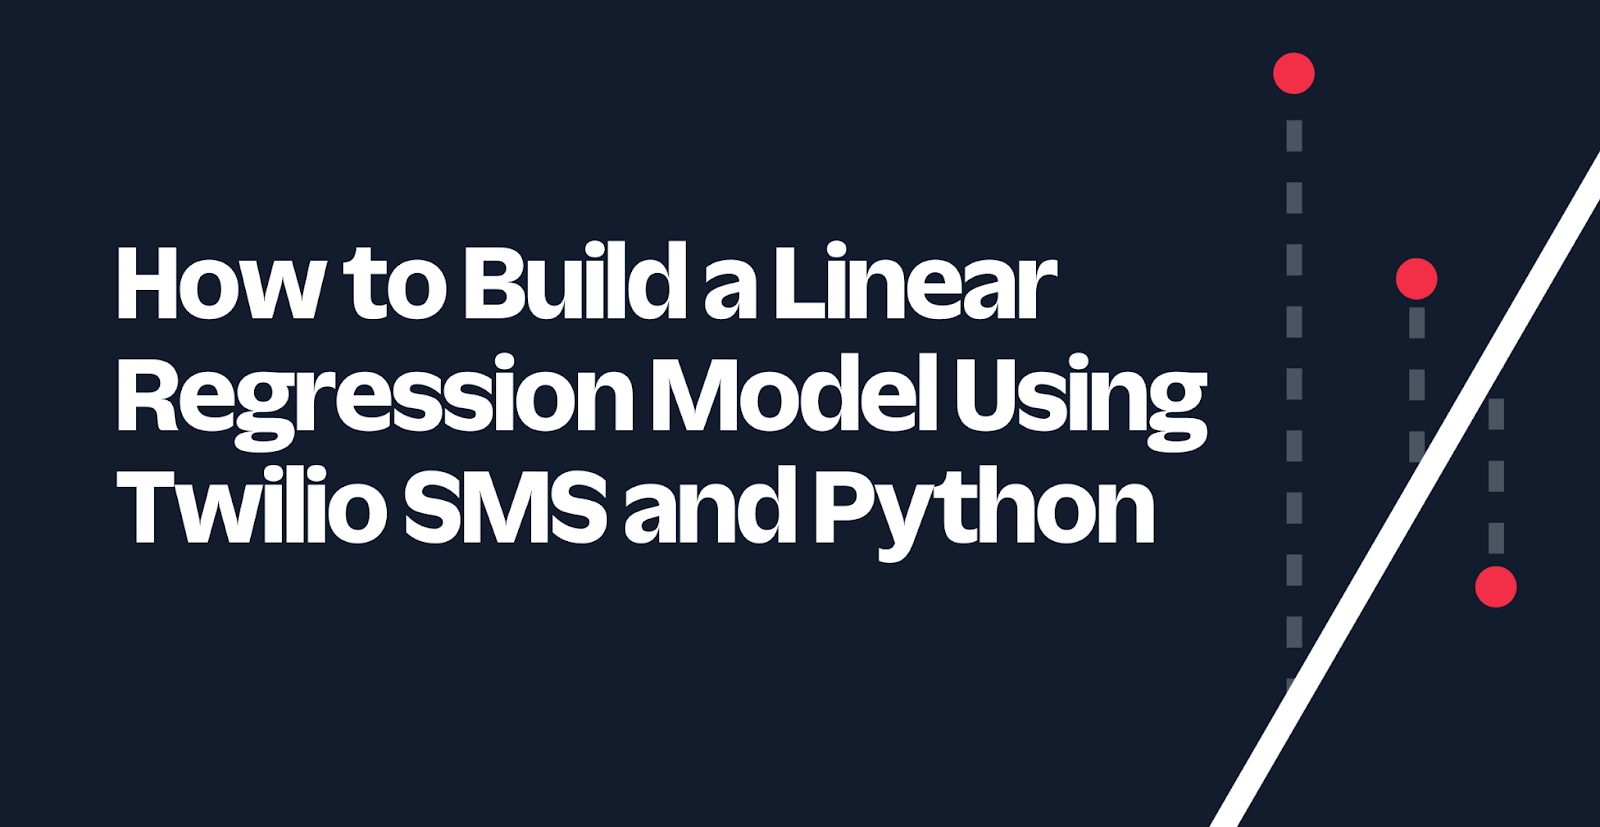 How to Build a Linear Regression Model Using Twilio SMS and Python